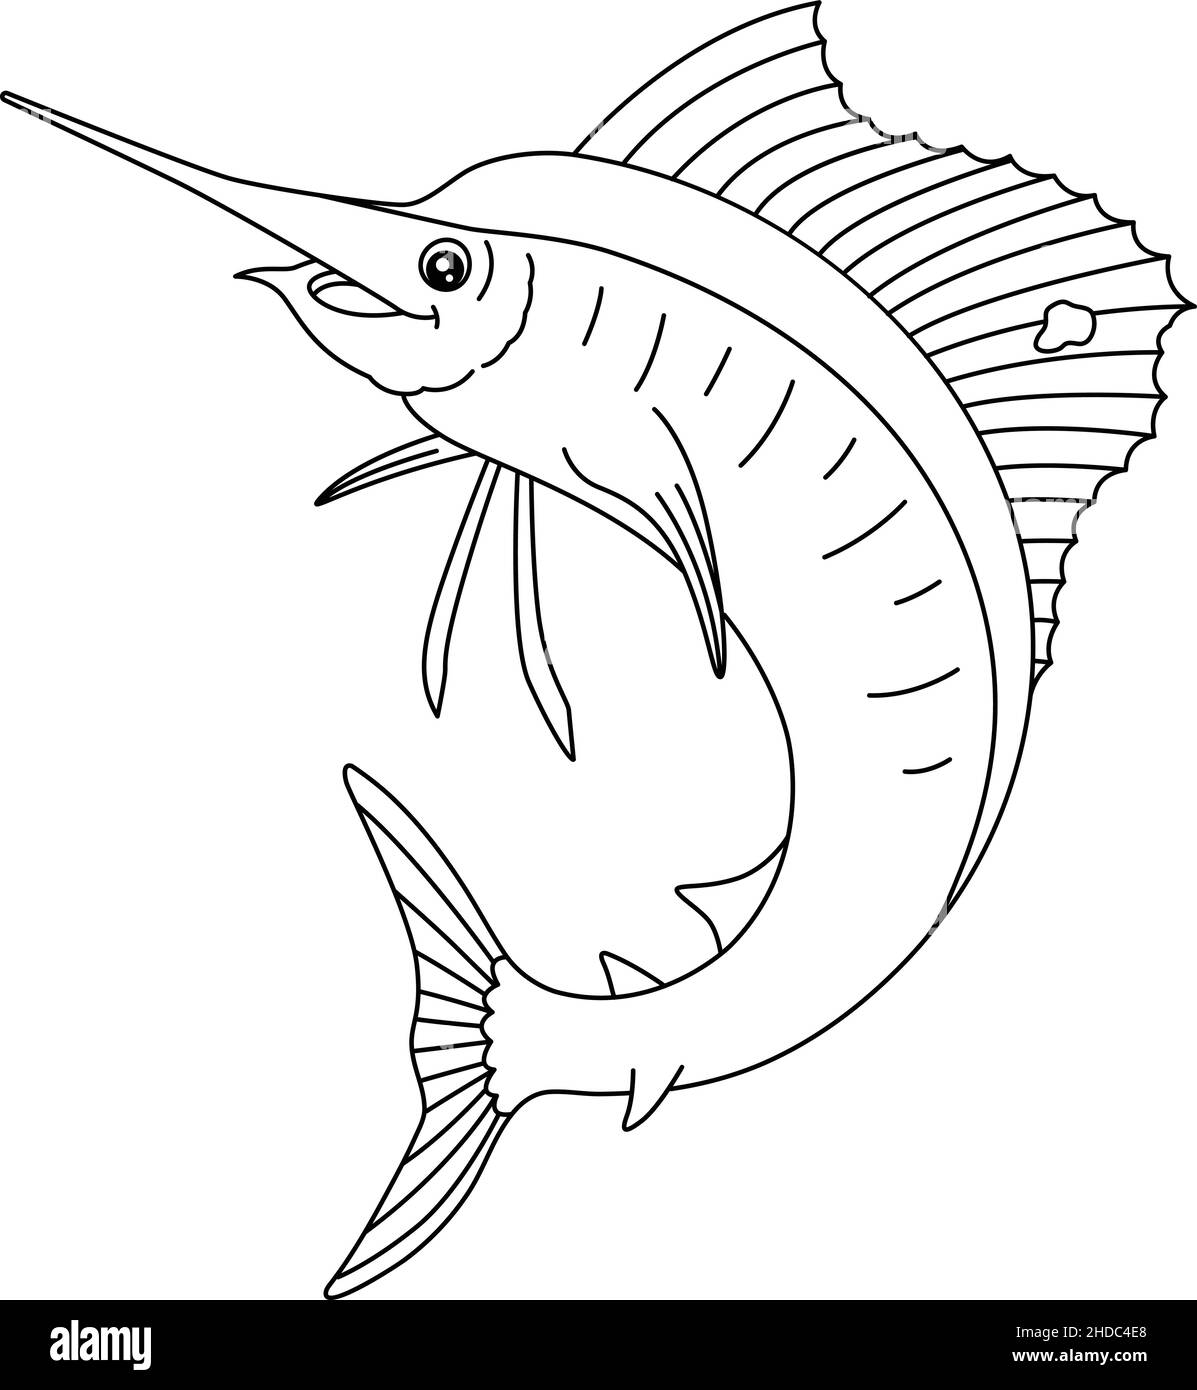 Sailfish Coloring Page Isolated for Kids Stock Vector